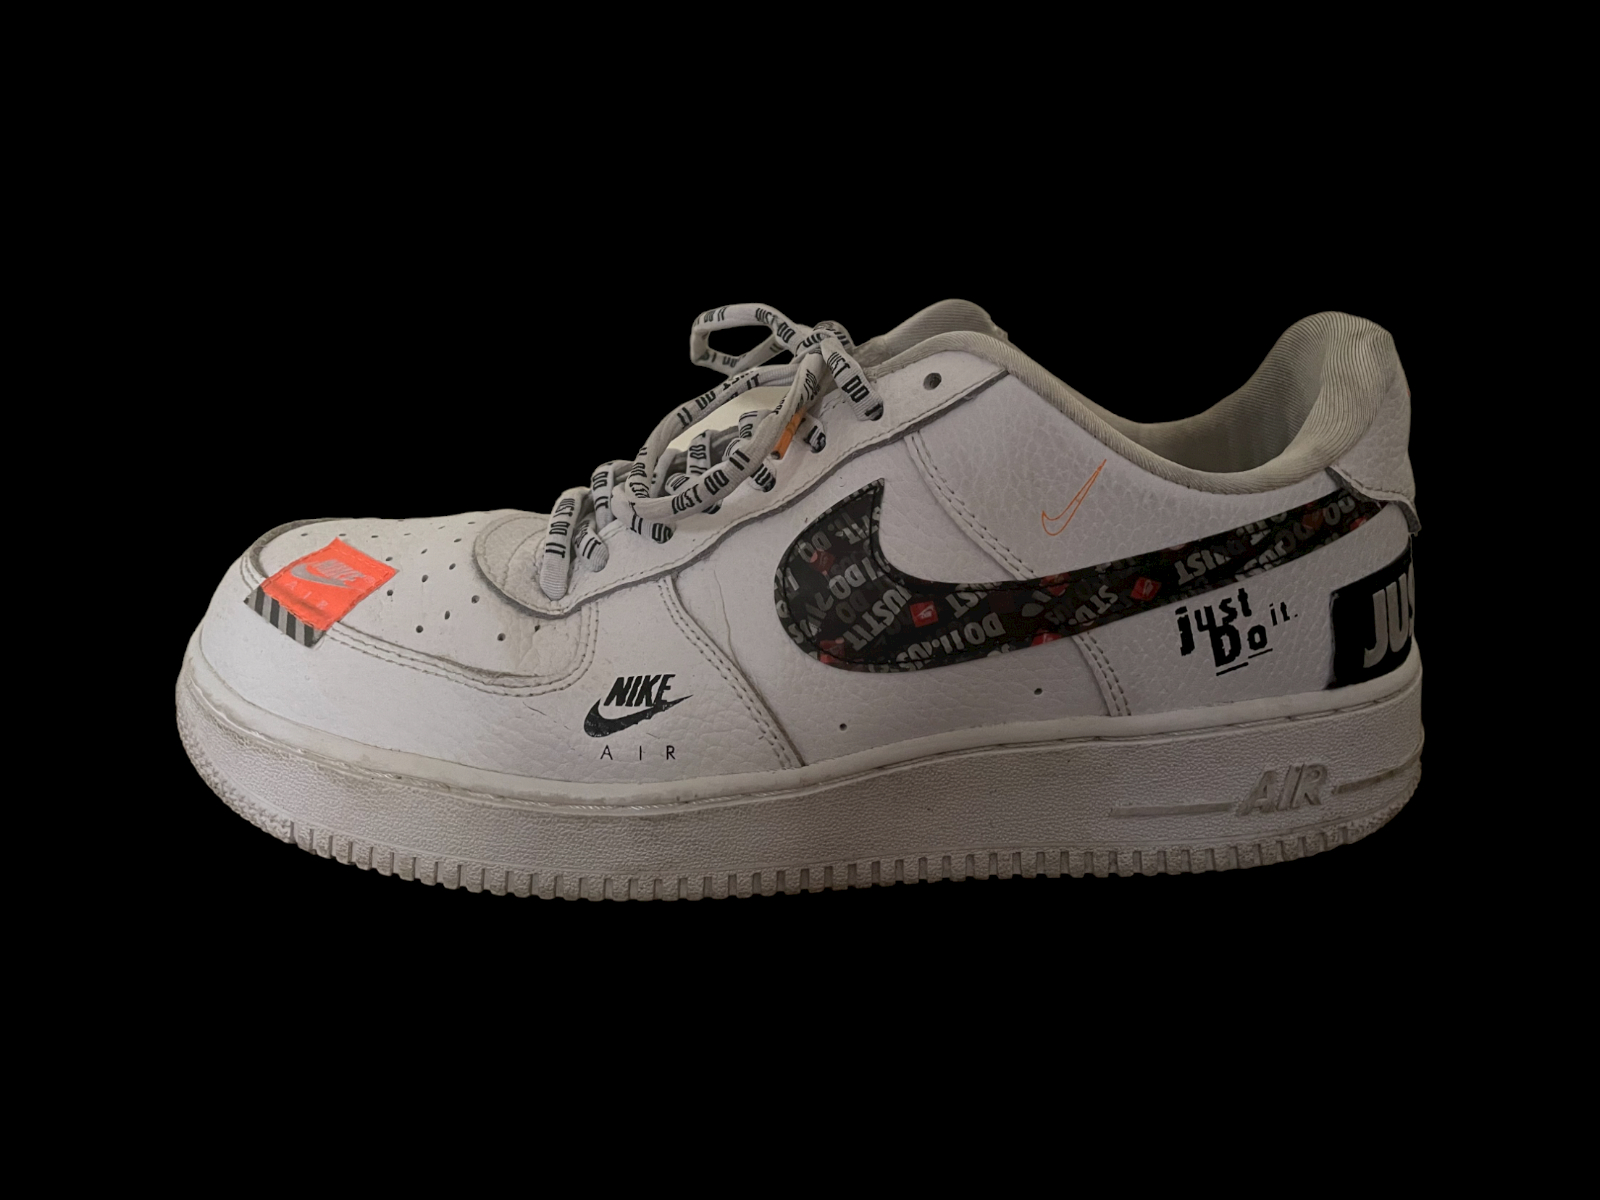 Nike Air Force Just Do it image